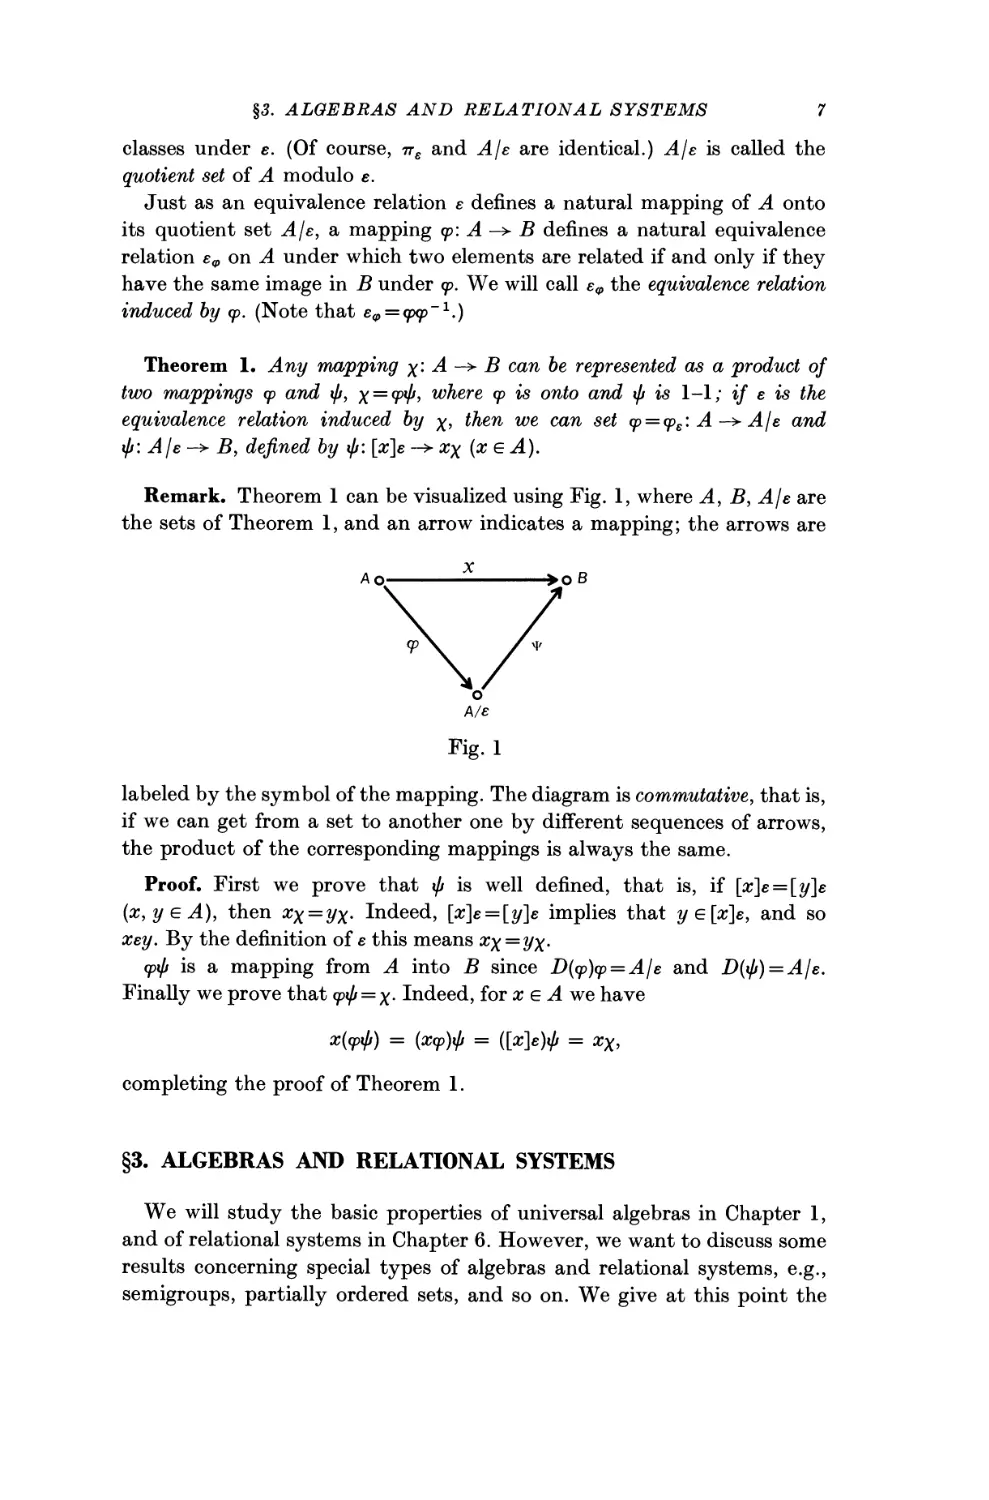 §3. Algebras and Relational Systems